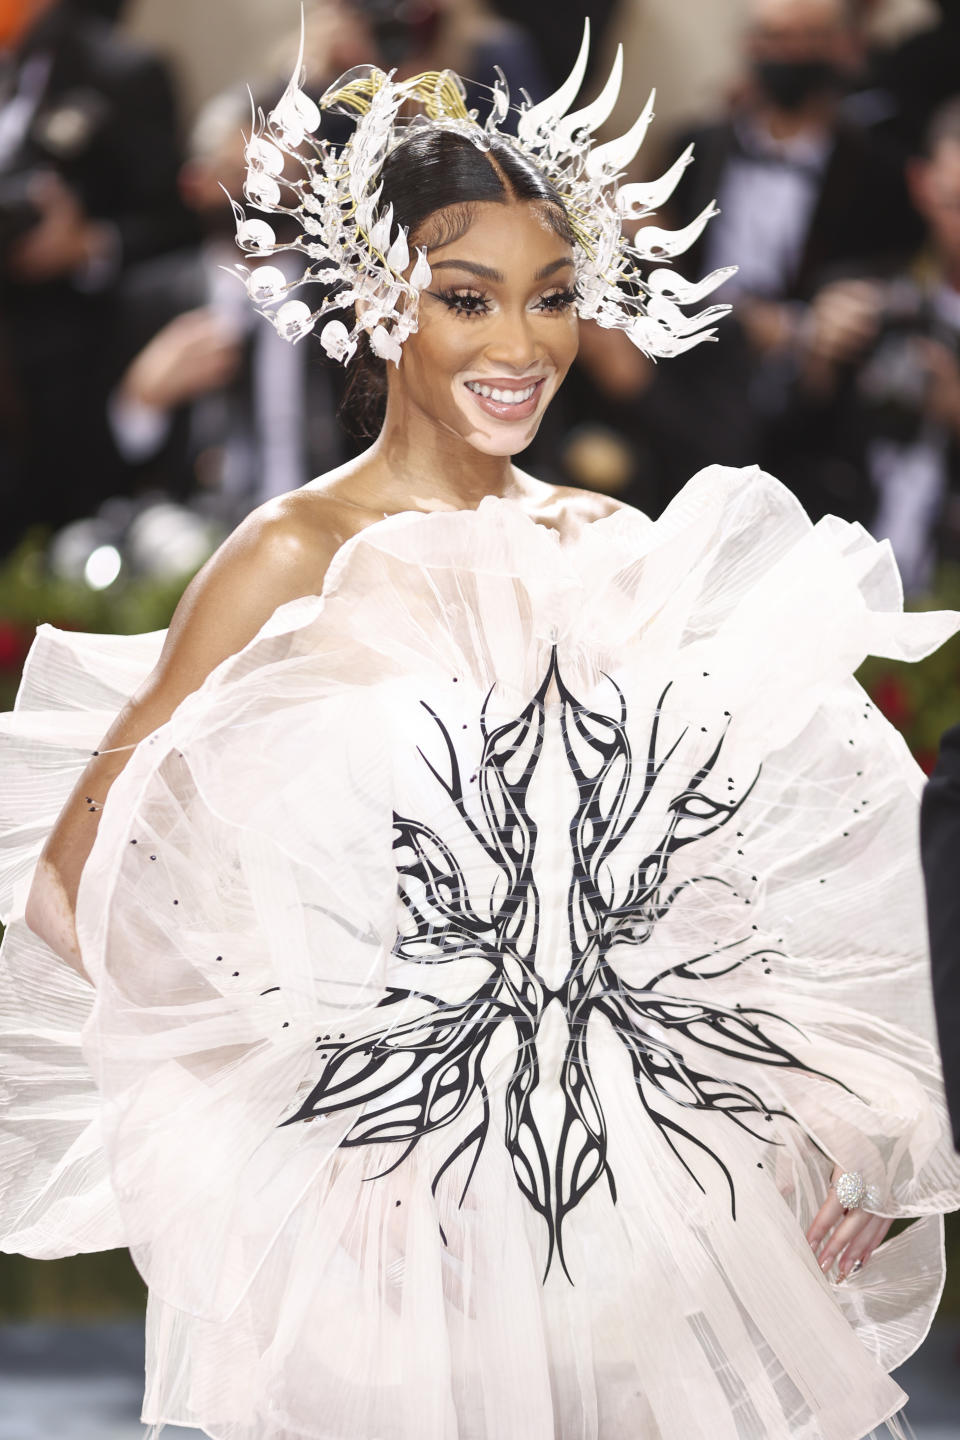 Winnie Harlow in a white dress and large white, feathery headpiece